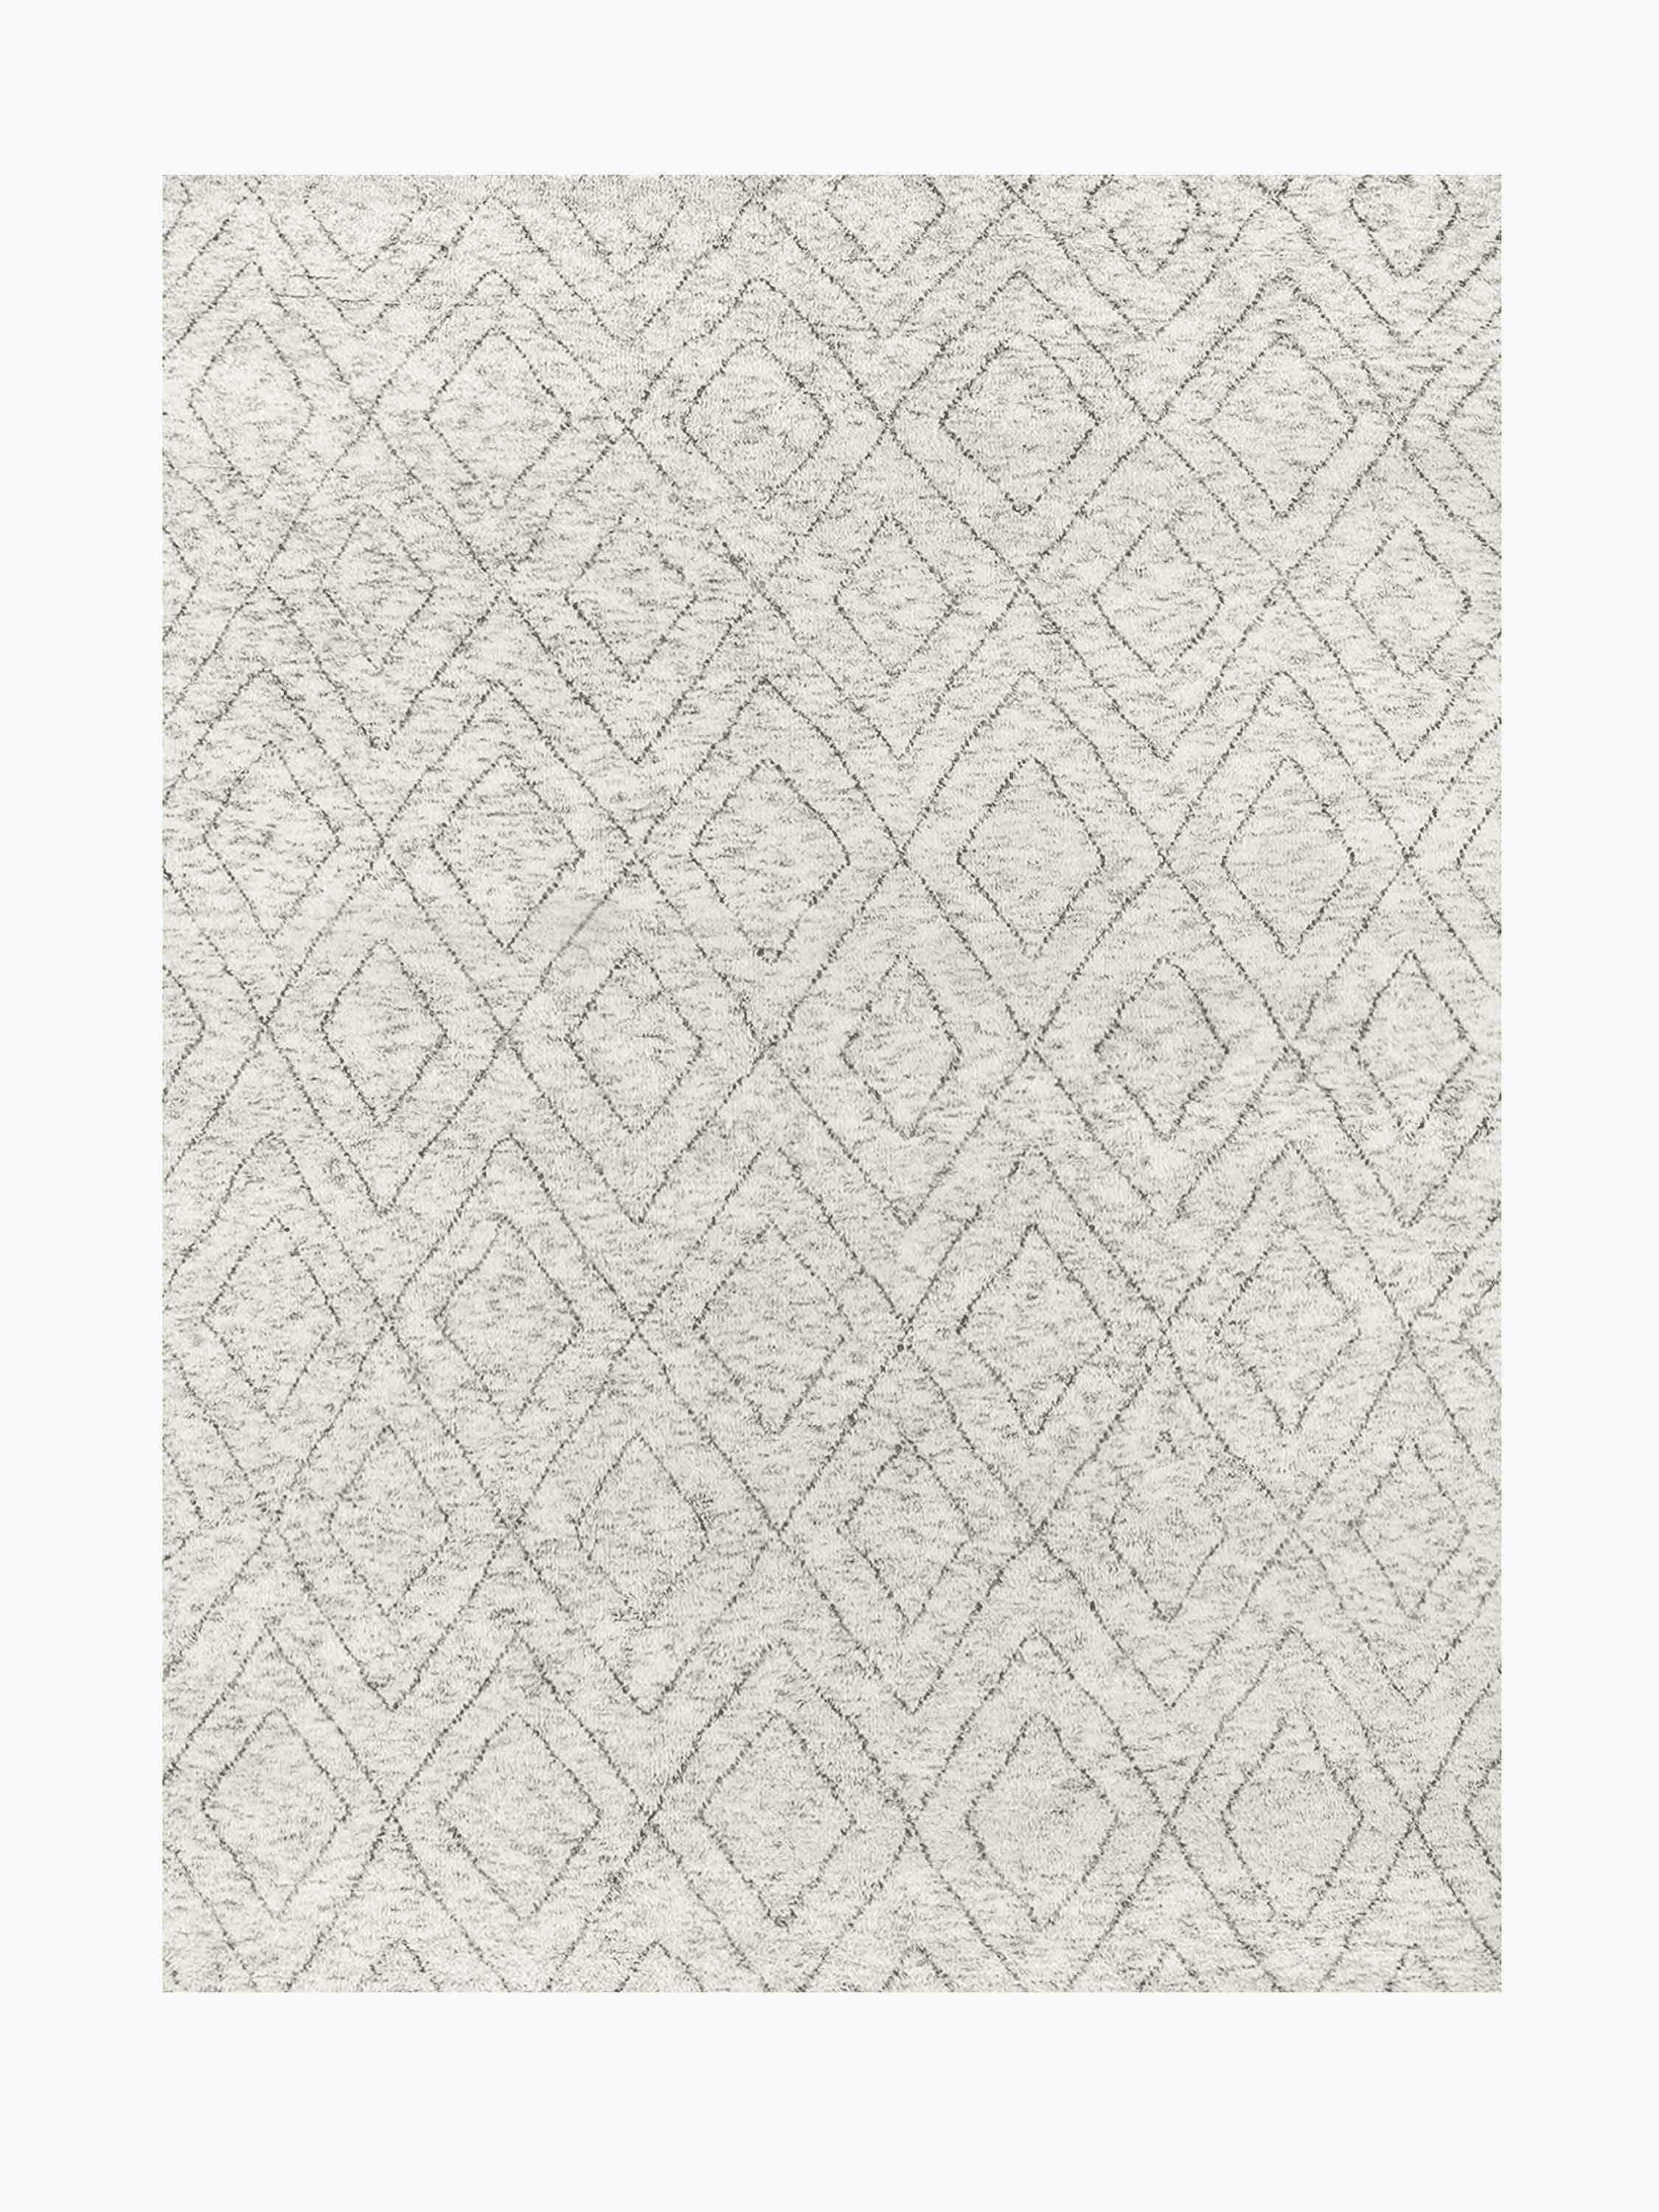 For Sale: Silver Ben Soleimani Double Diamond Rug– Moroccan Hand-knotted Wool Grey 12'x15'